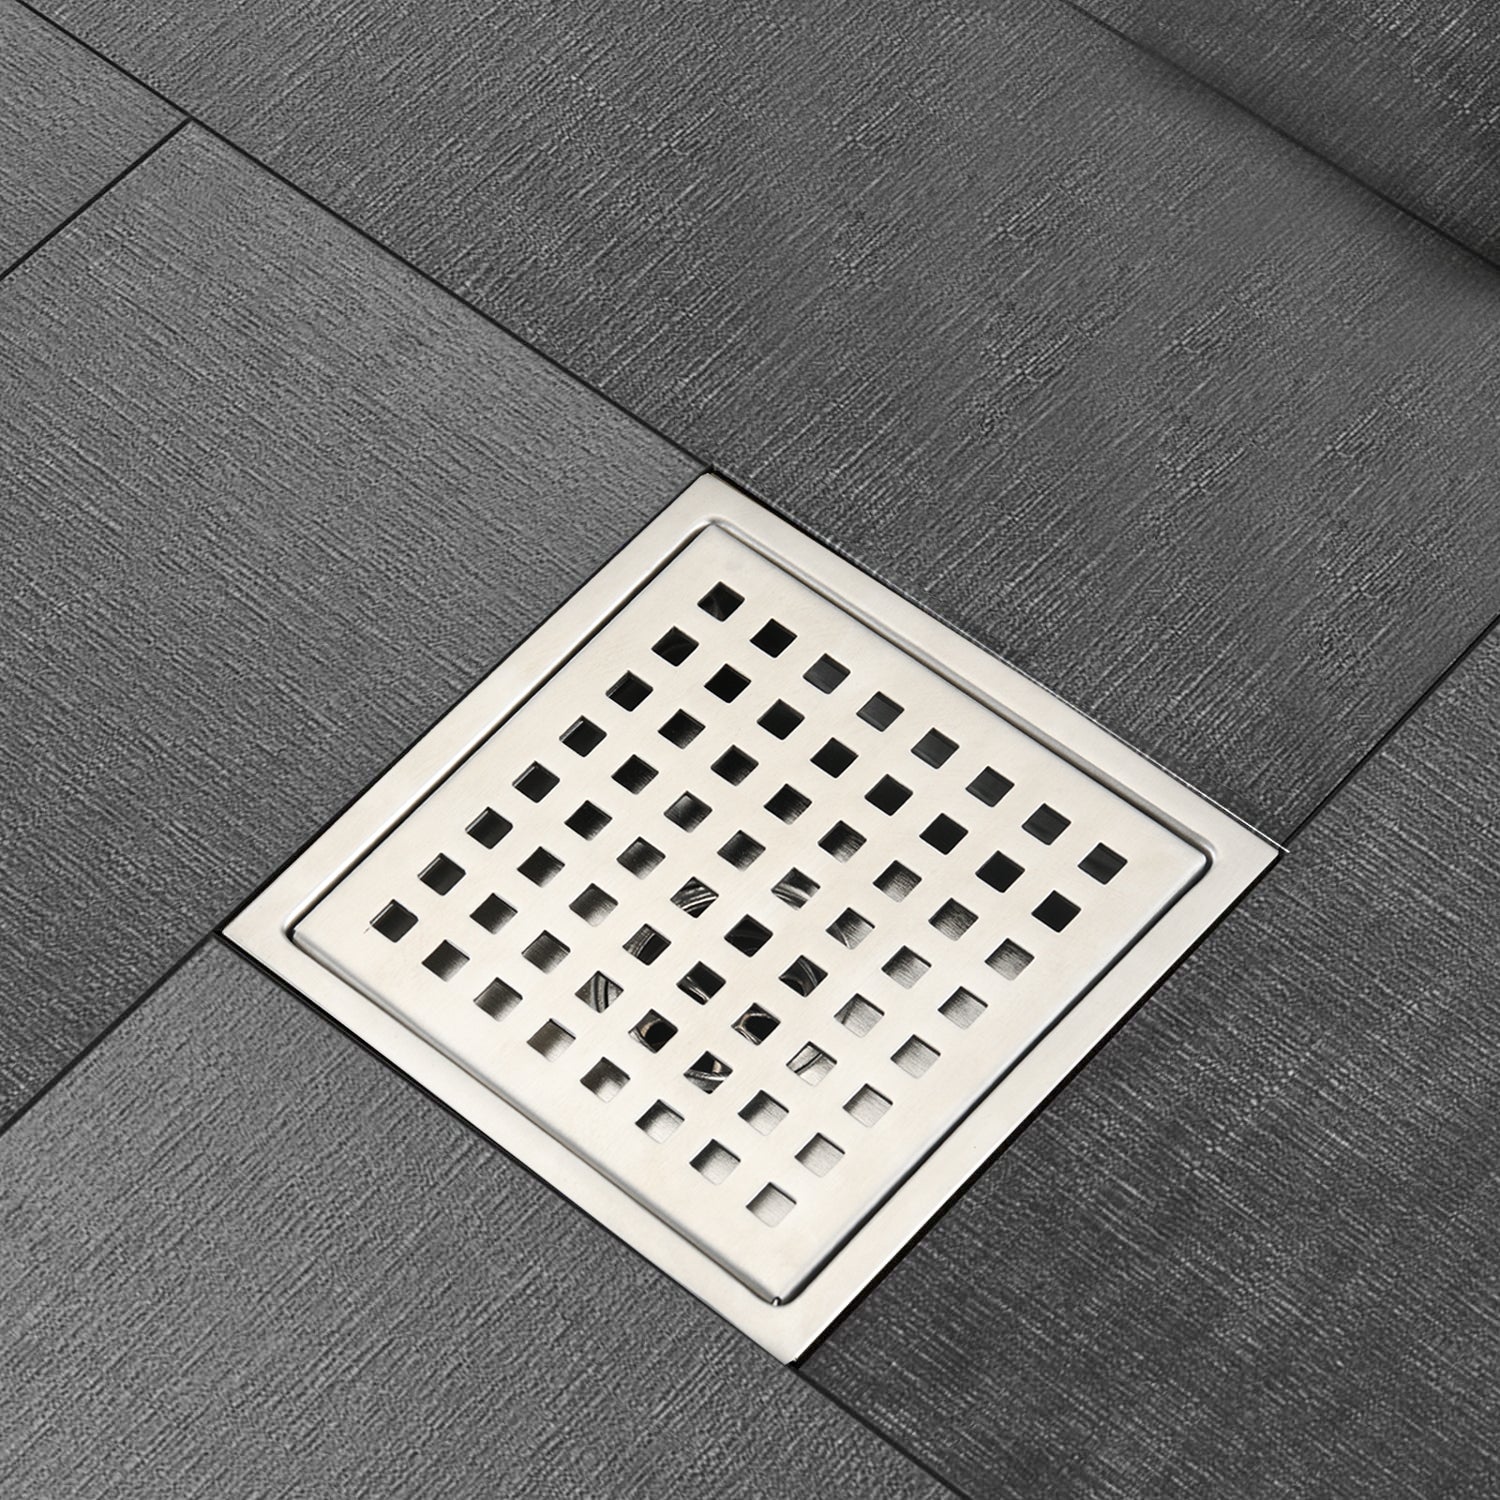 6 Inch Square Shower Floor Drain brushed nickel-stainless steel